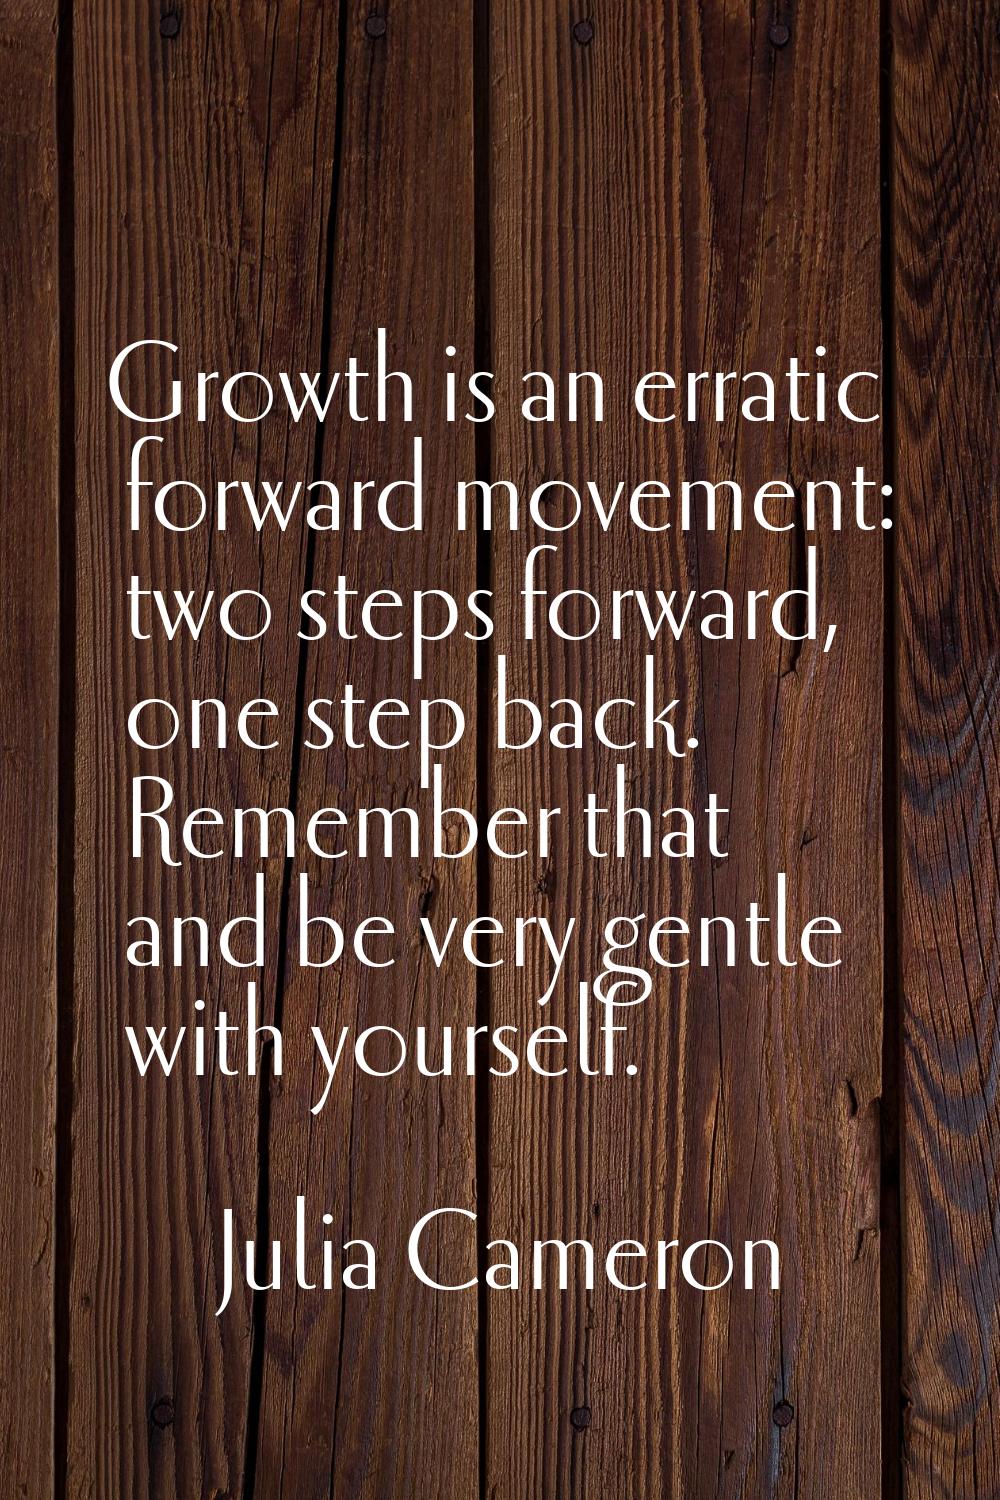 Growth is an erratic forward movement: two steps forward, one step back. Remember that and be very 